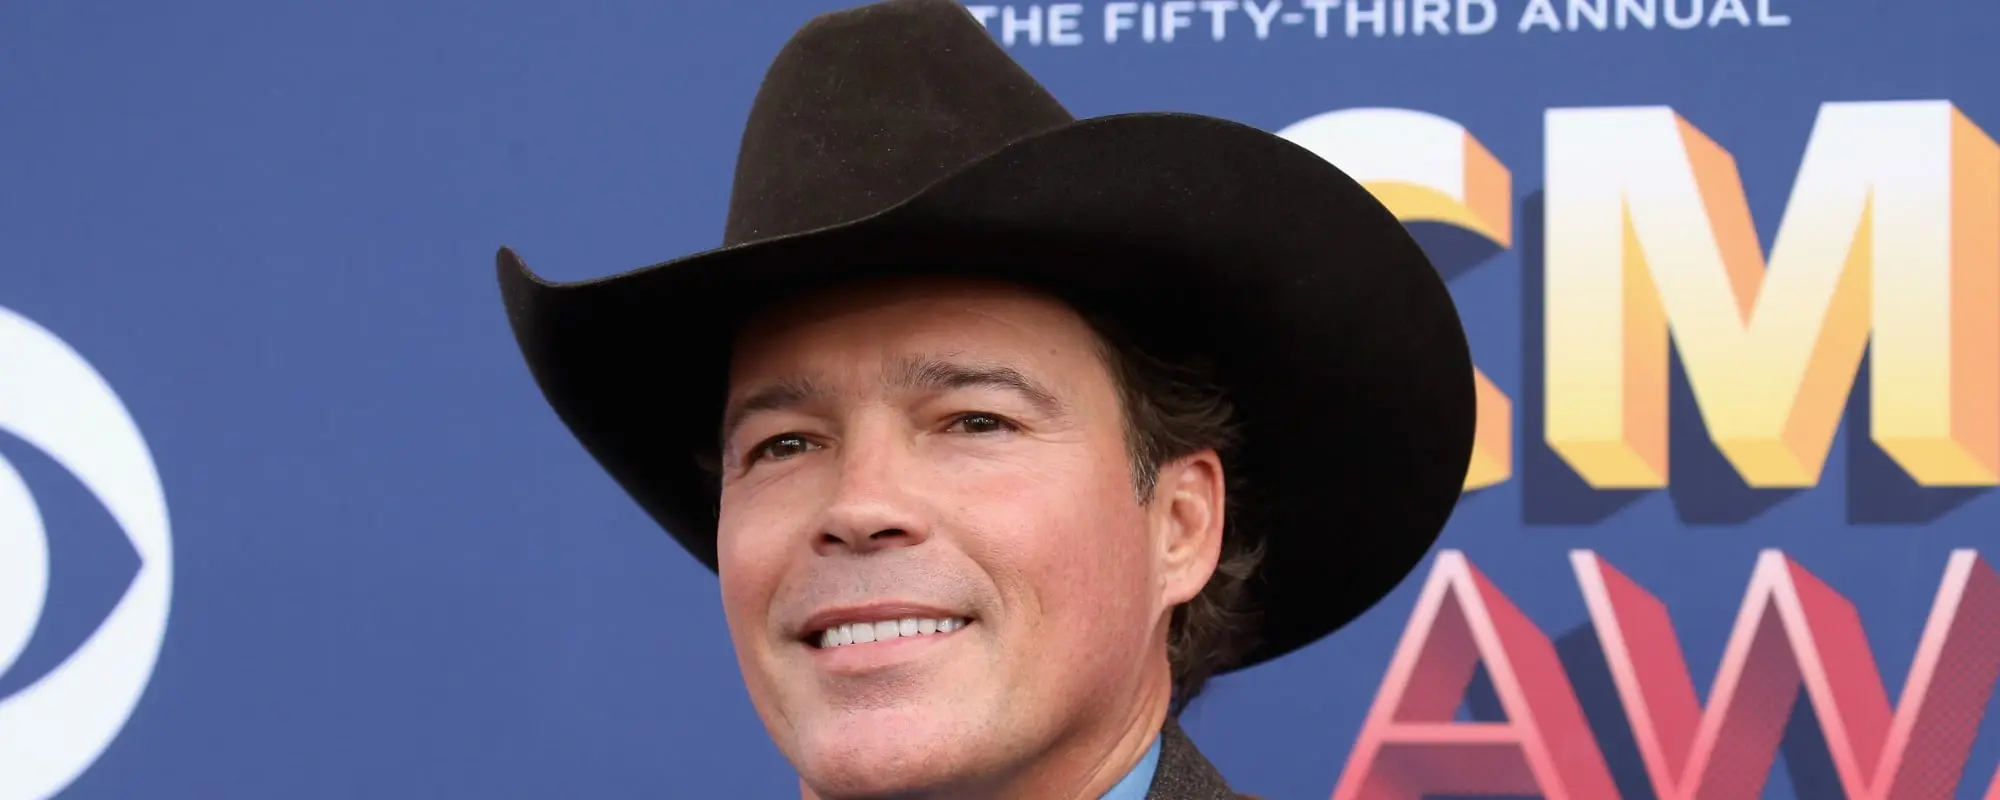 Watch Clay Walker and Cody Johnson’s Awesome Reaction to Randy Travis’ New Single “Where That Came From”